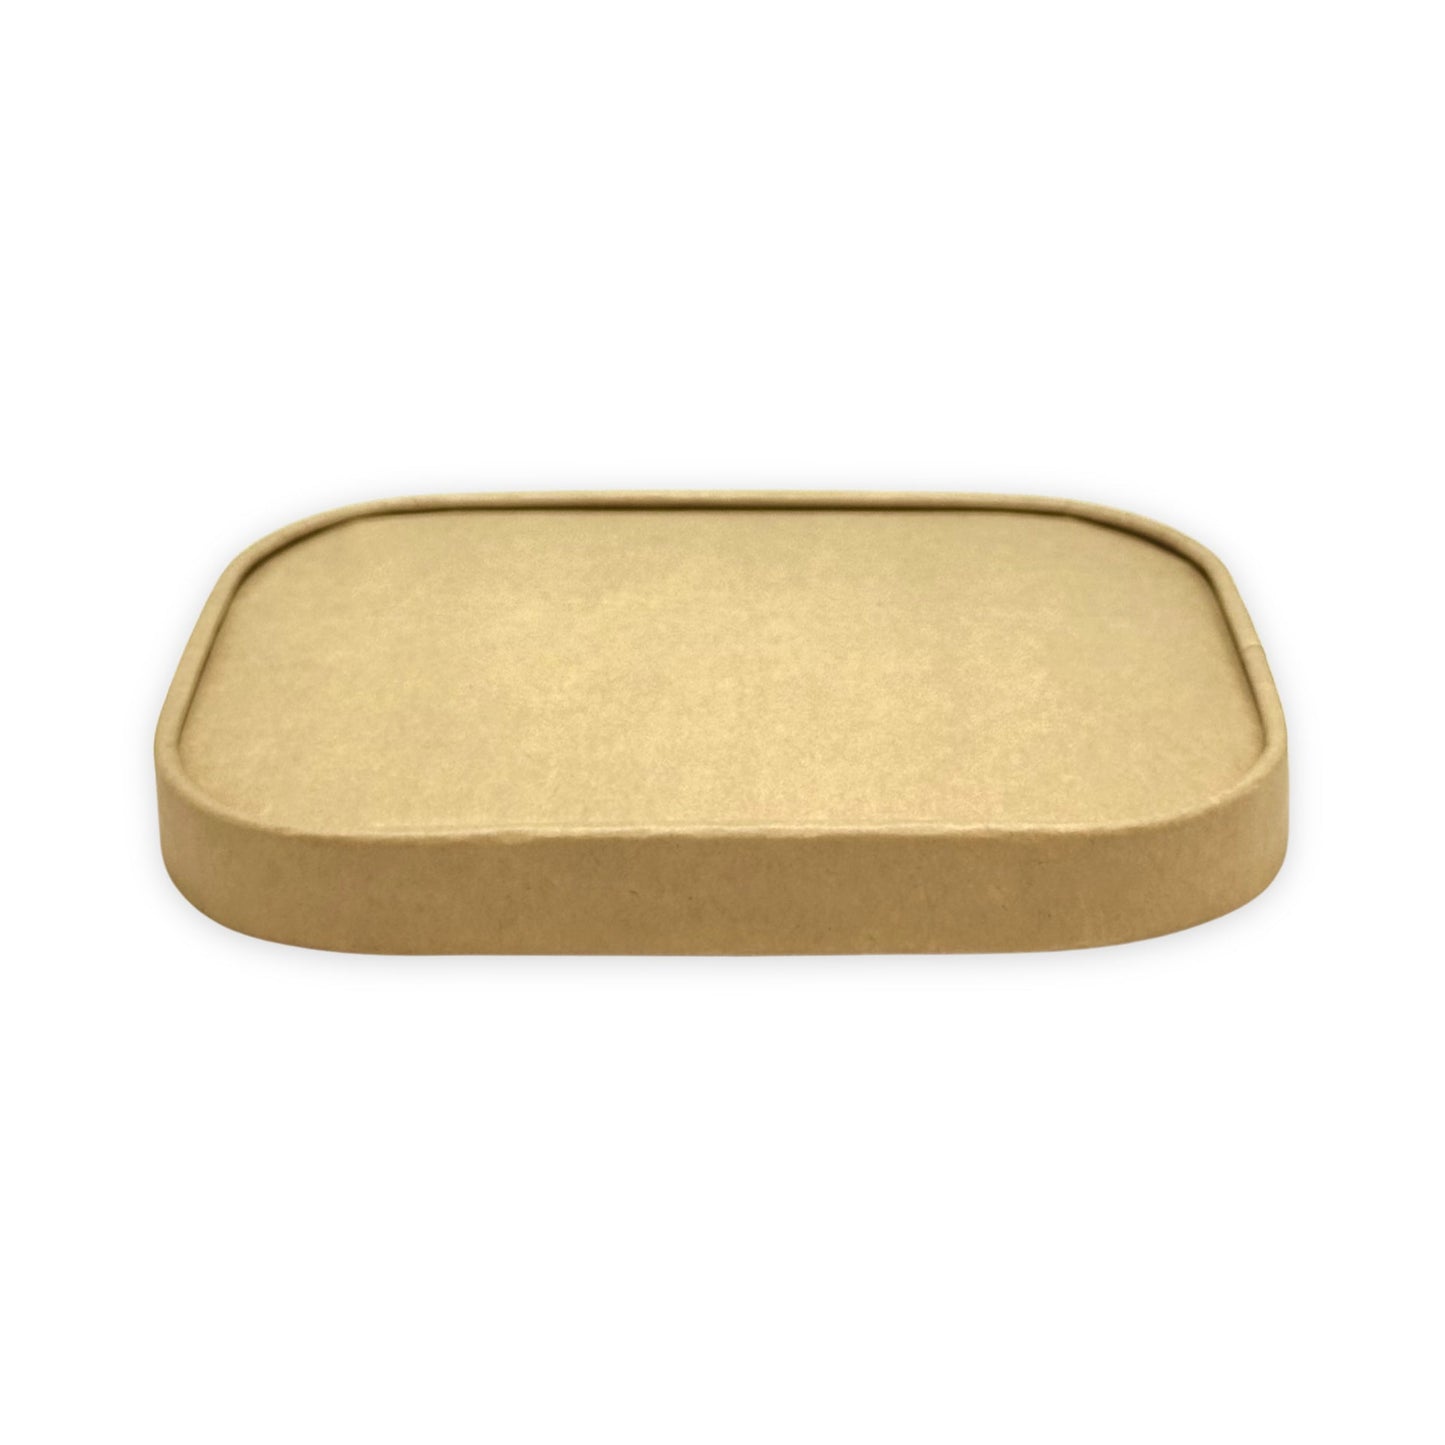 KIS-PA475 | Kraft Paper Lids for 17oz-34oz Kraft Paper Rectangle Containers; From $0.229/pc